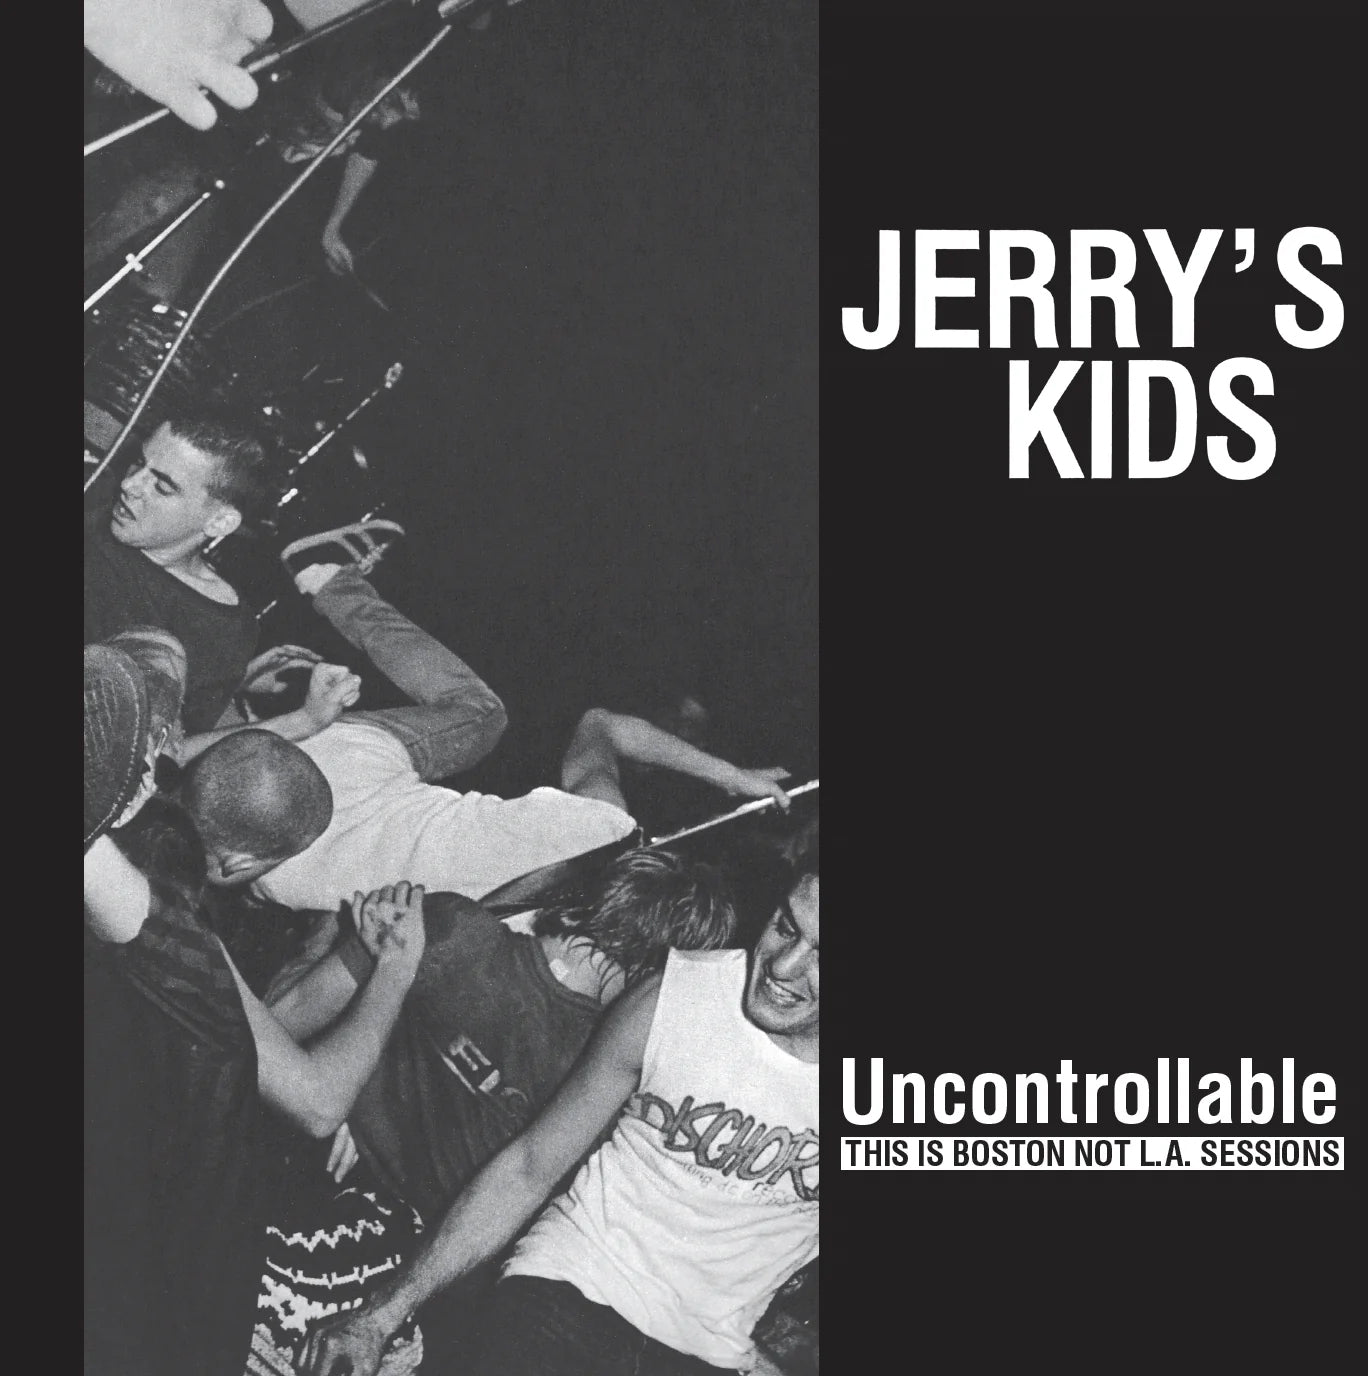 Jerry's Kids – Uncontrollable: This is Boston Not L.A. Sessions